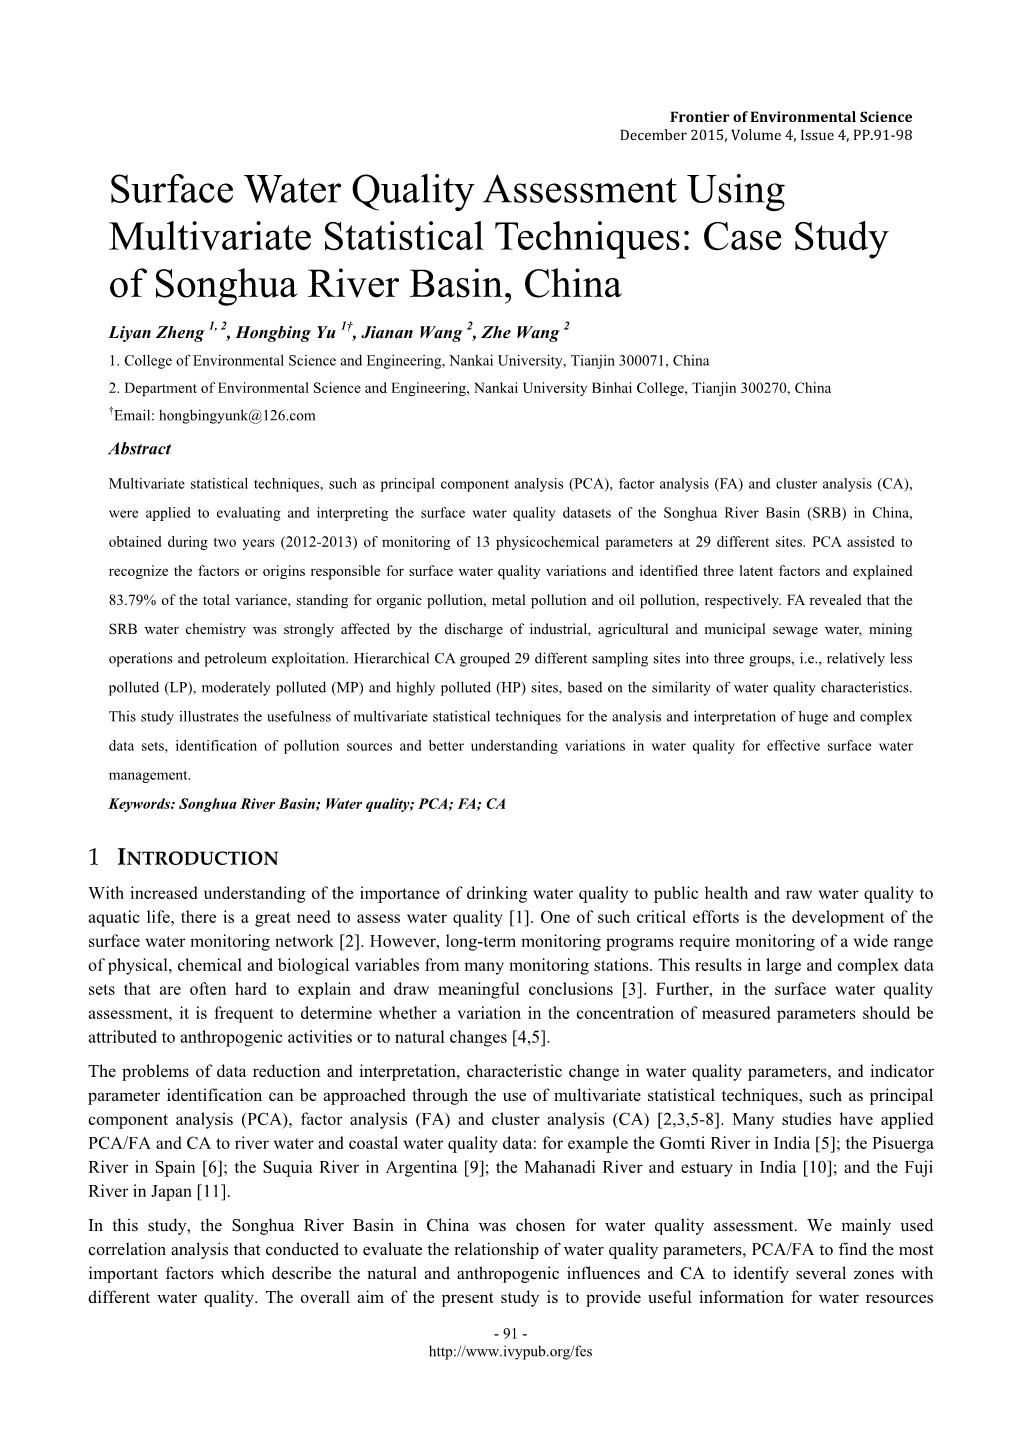 Surface Water Quality Assessment Using Multivariate Statistical Techniques: Case Study of Songhua River Basin, China